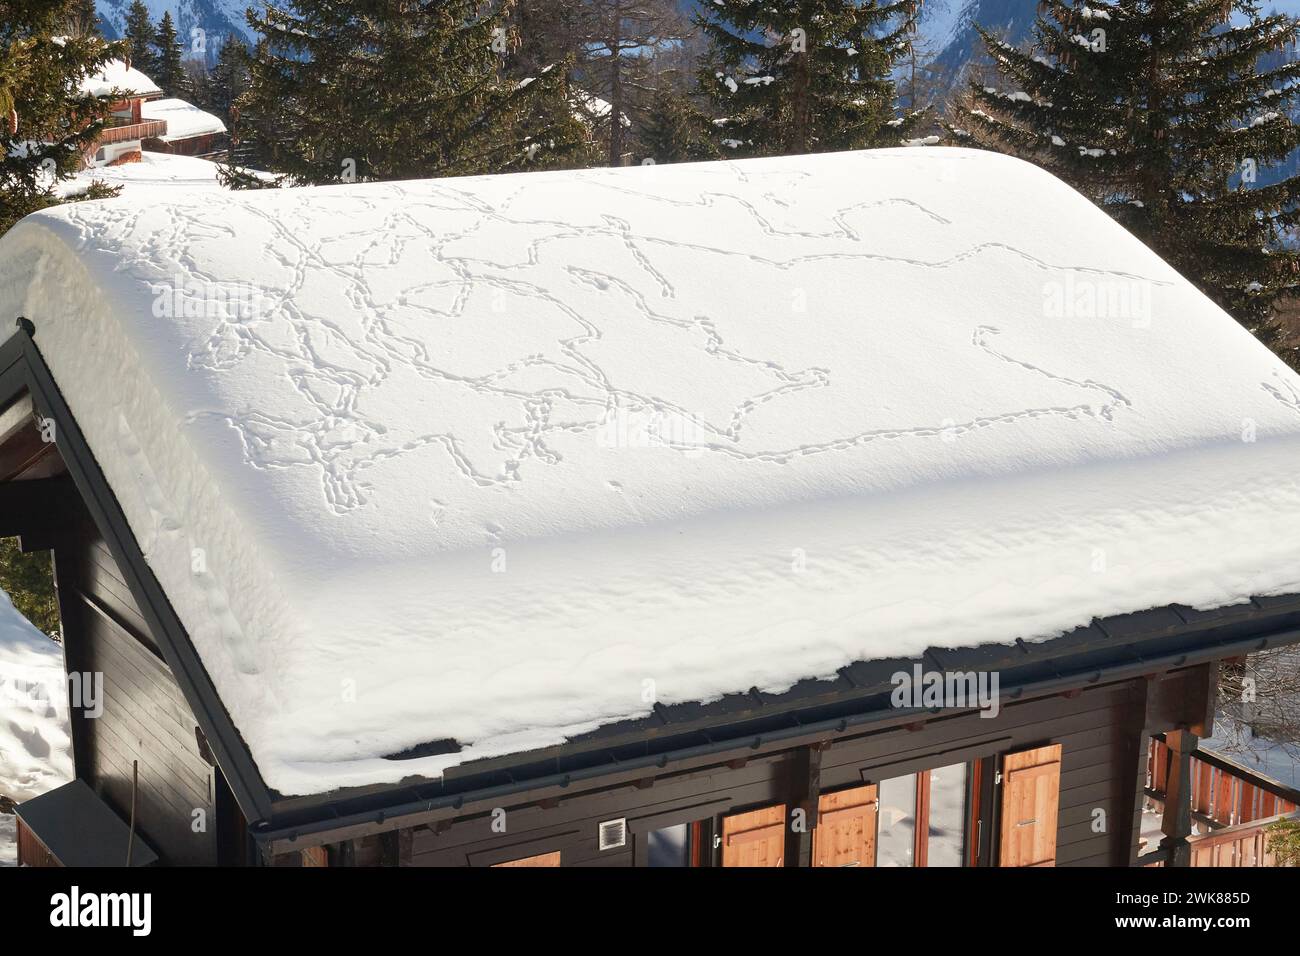 A snow-covered roof of a rural cottage with foot tracks. Bettmeralp, Switzerland Stock Photo